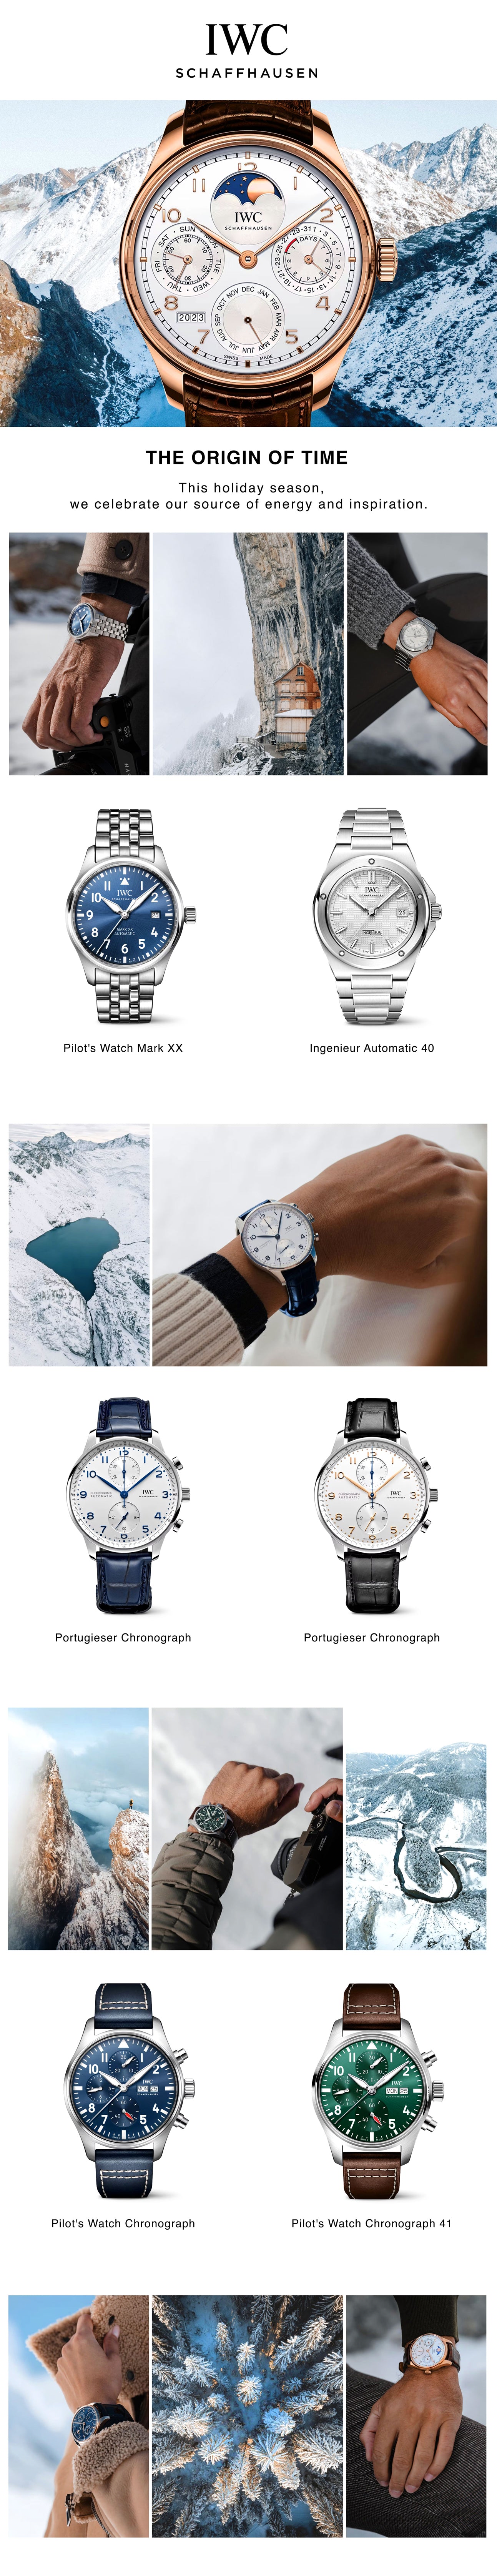 The Origin of Time_IWC Schaffhausen Holiday Collection